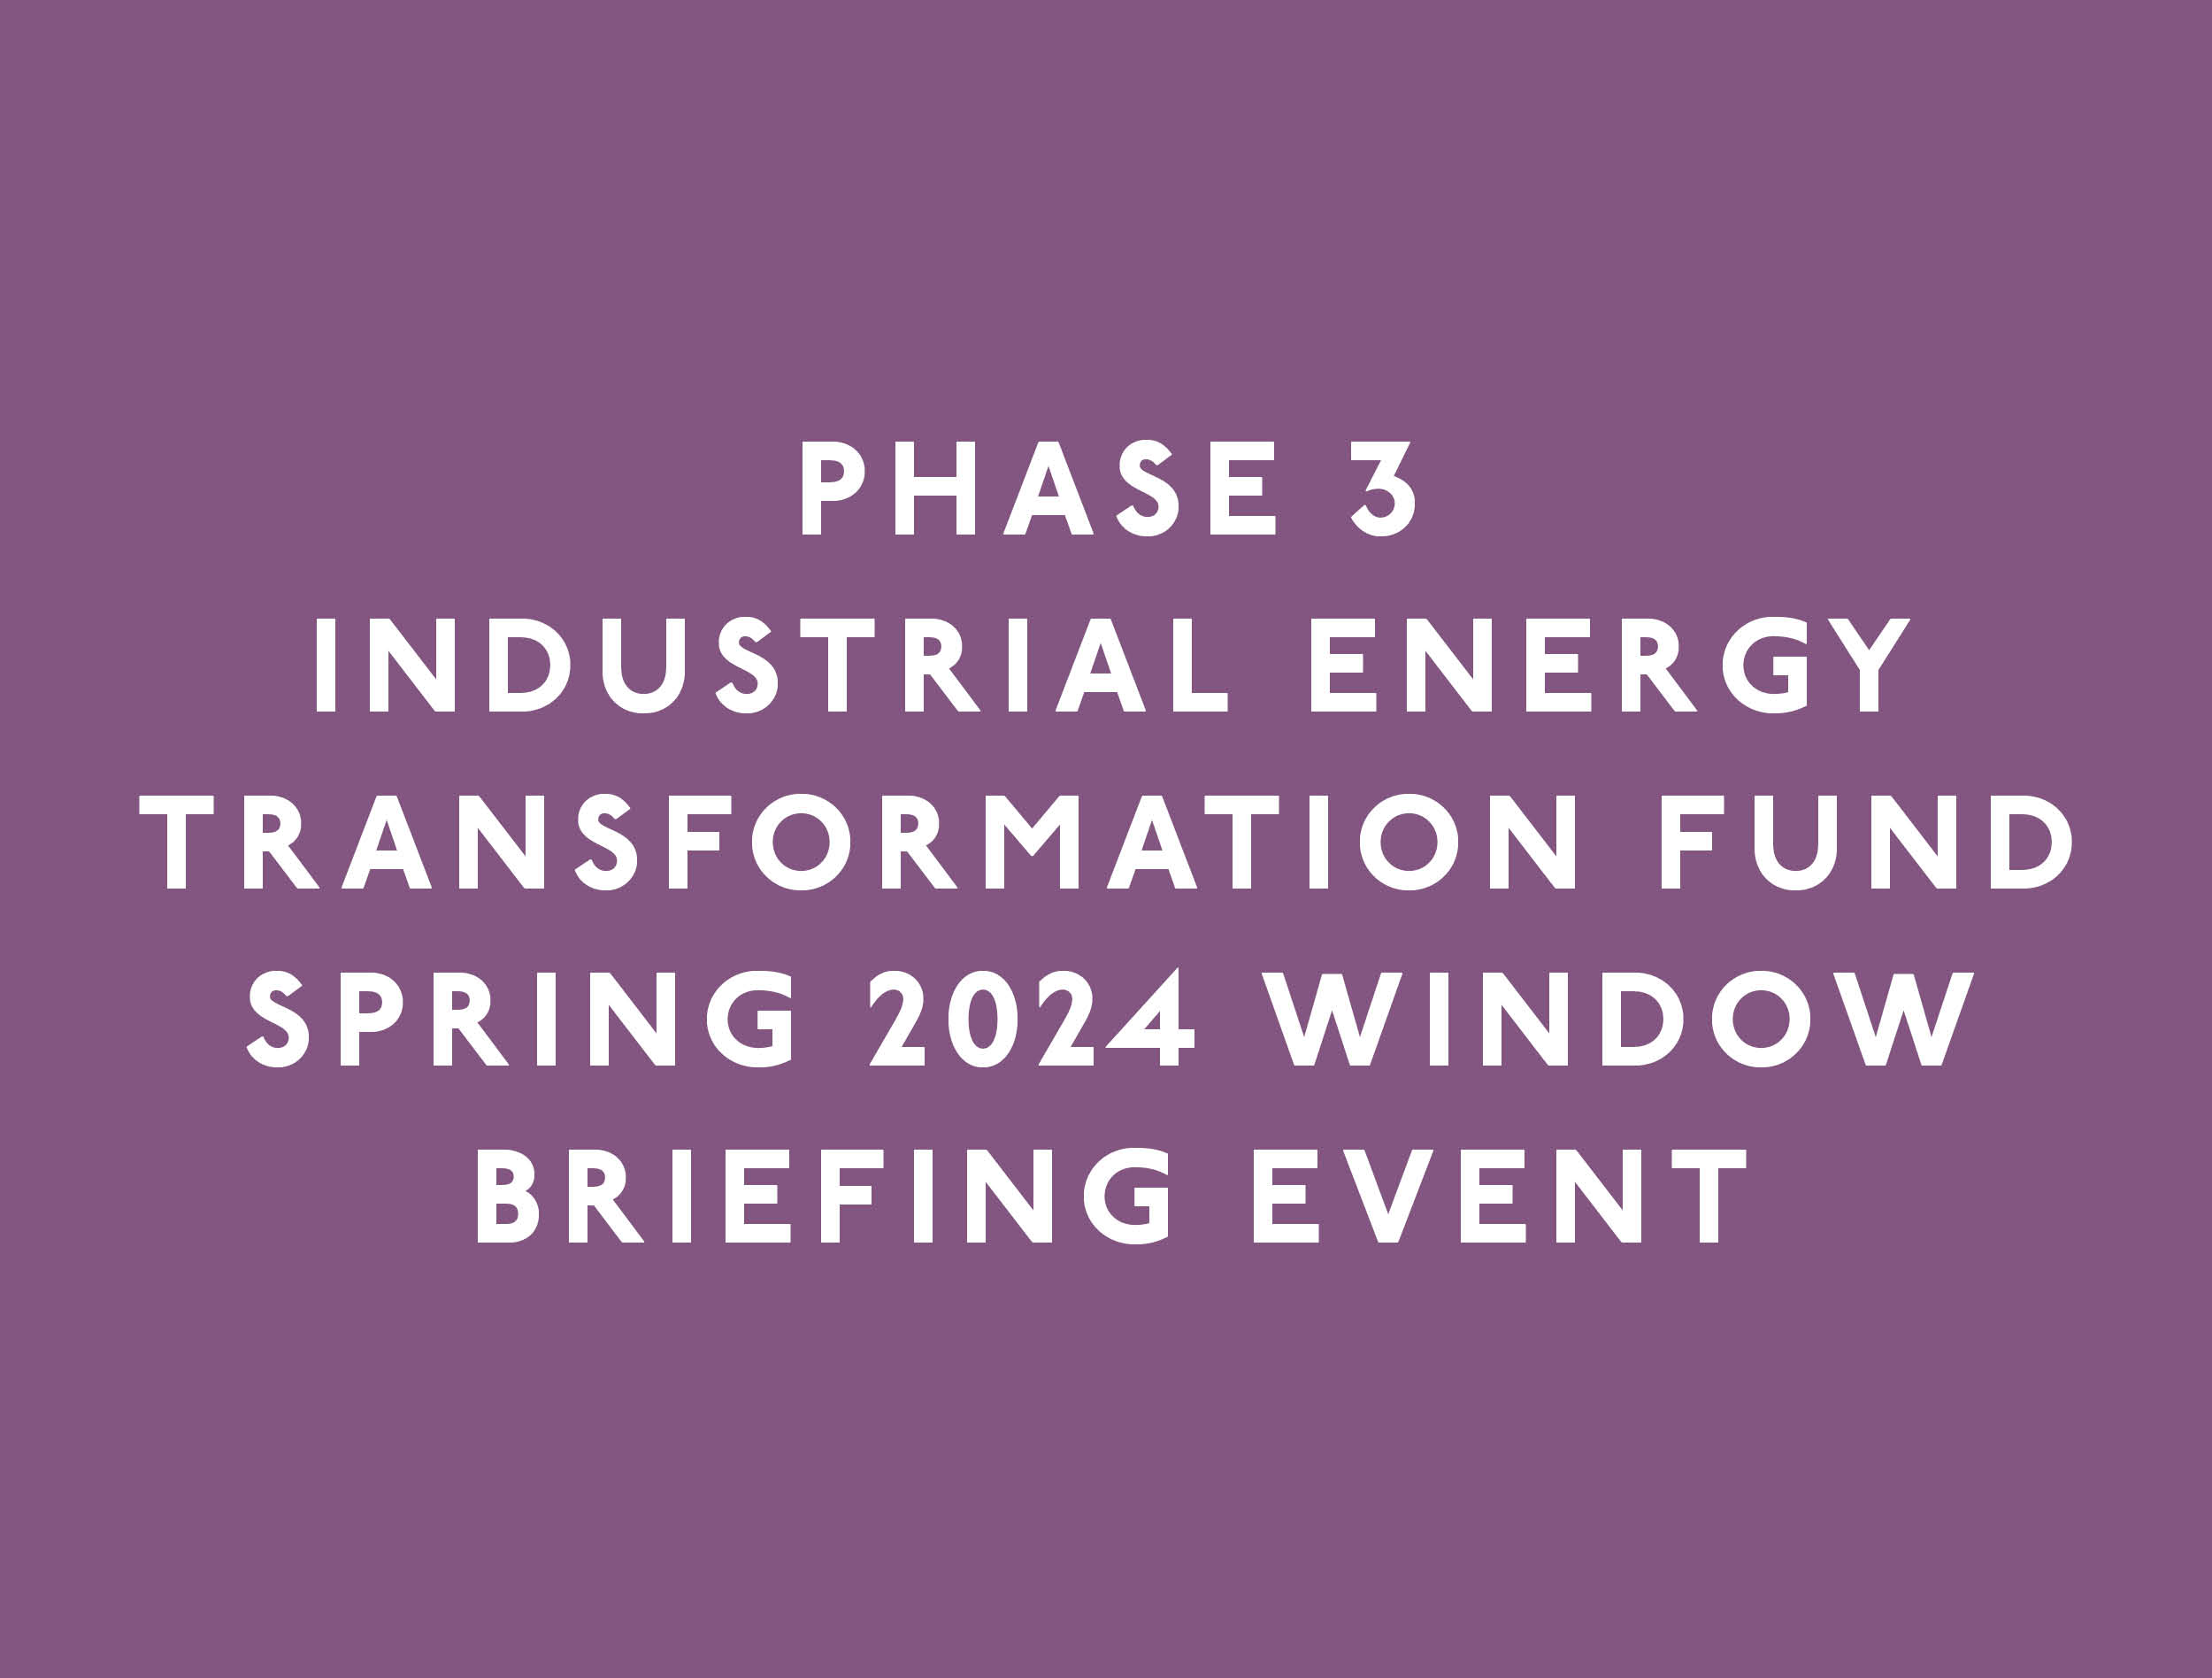 Phase 3 Industrial Energy Transformation Fund Spring 2024 window briefing event